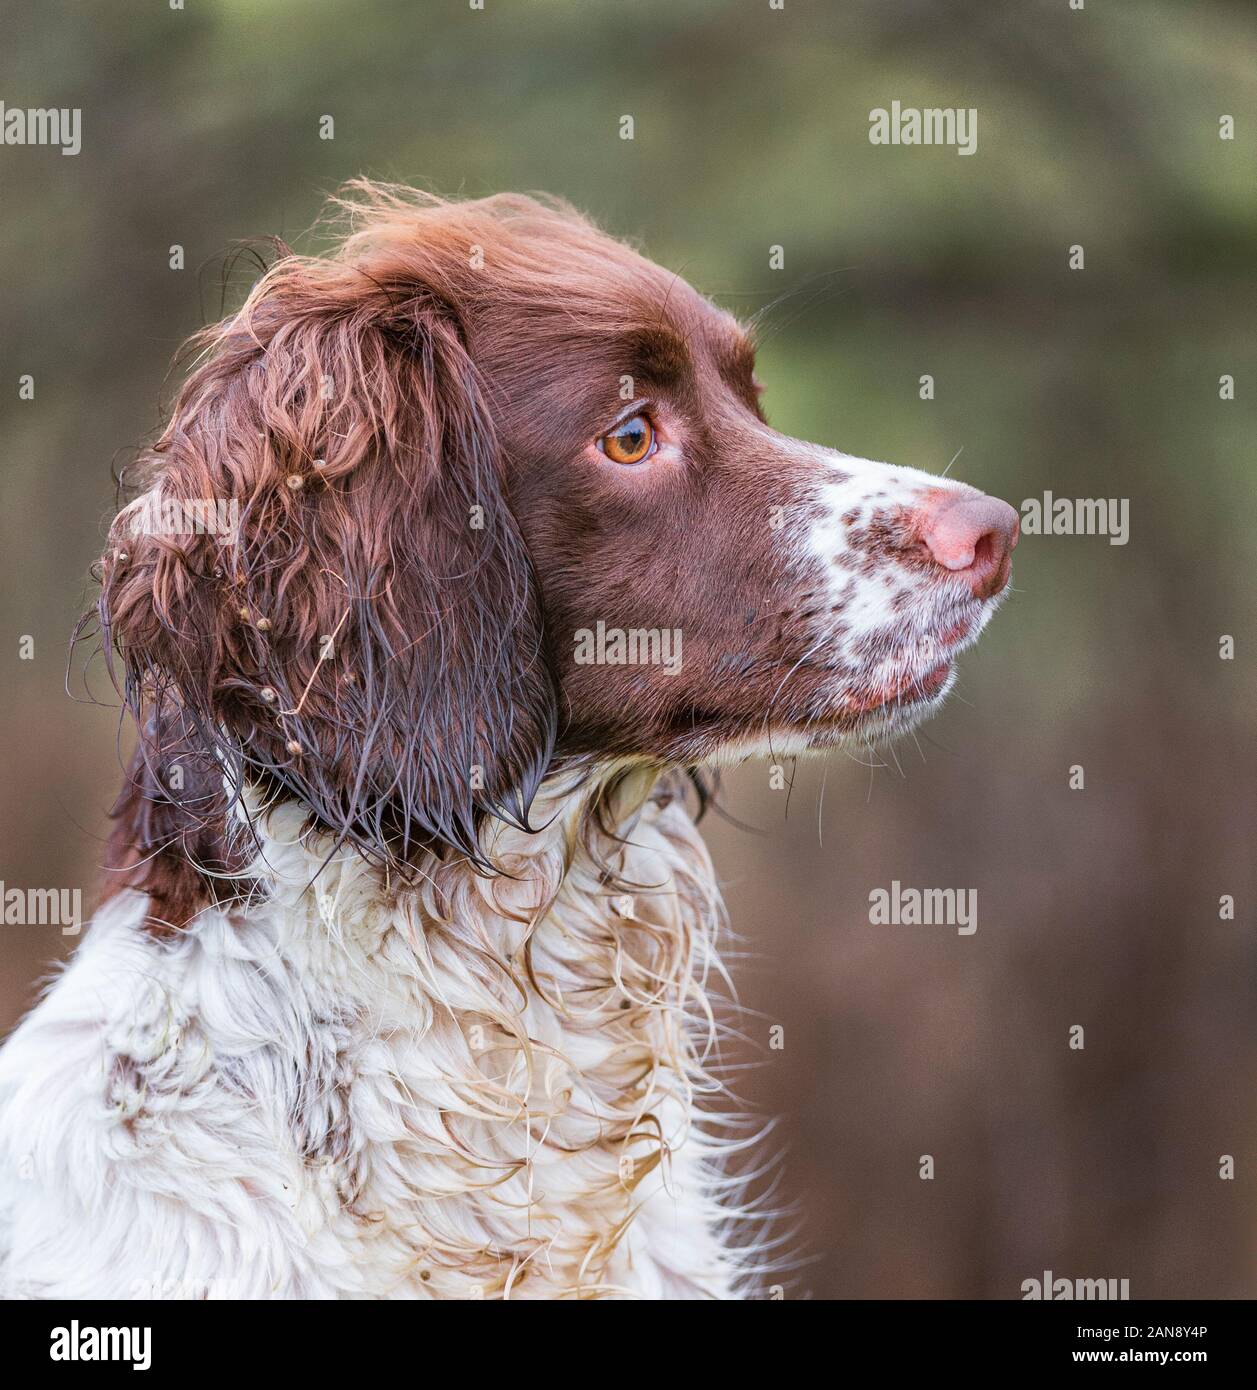 A young, 18 month old, English Springer Spaniel during a field training class Stock Photo